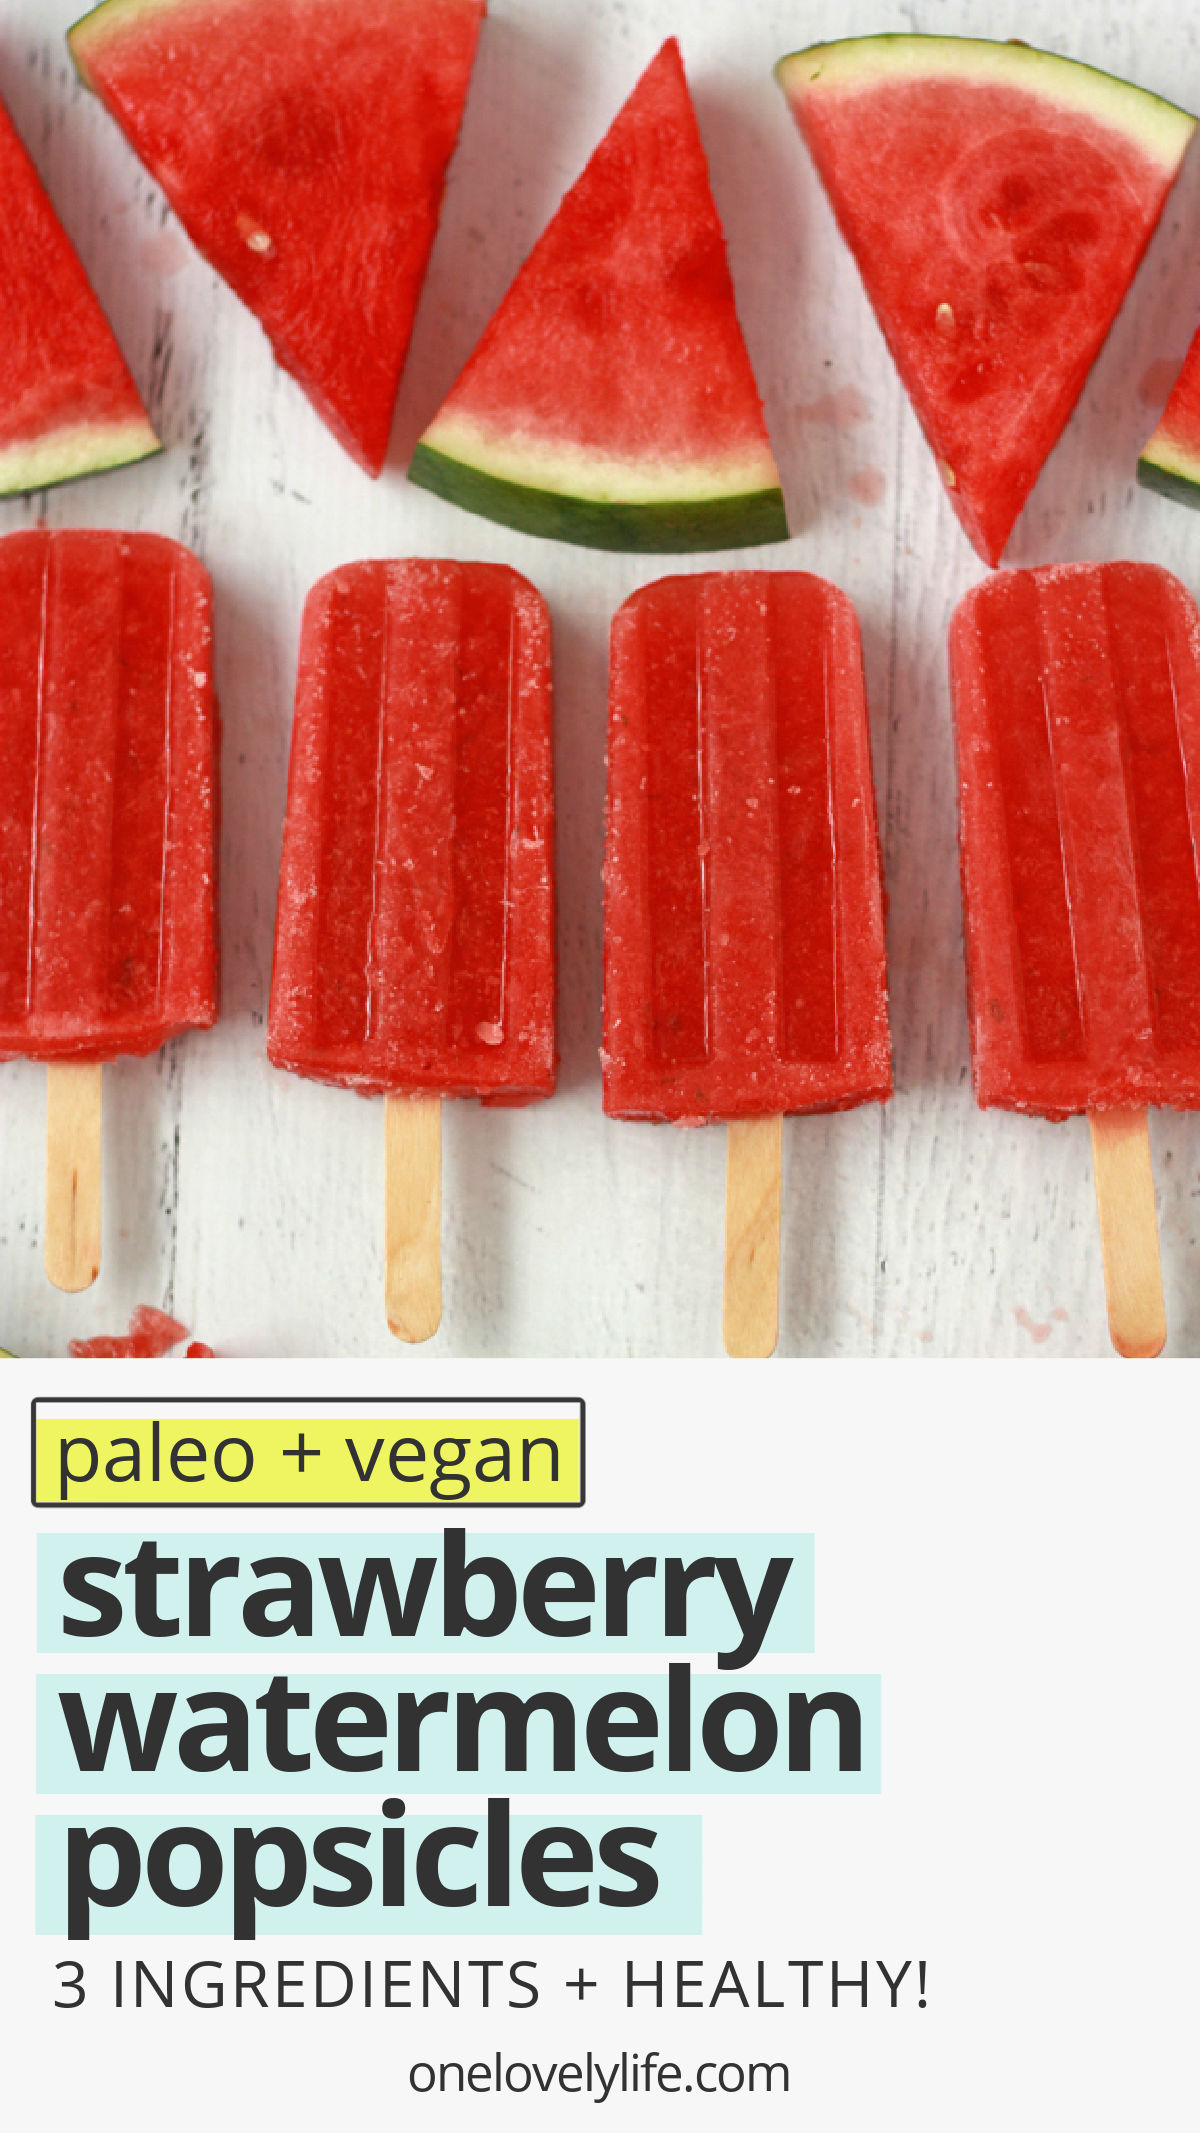 Strawberry Watermelon Popsicles are a fresh, bright, healthy warm weather treat! They're 100% fruit and naturally help balance your electrolytes. (Vegan & paleo) // healthy popsicles // strawberry popsicles // watermelon popsicles // paleo popsicles // vegan popsicles // naturally sweetened // healthy snack // #healthy #popsicles #icepops #paleo #vegan #dessert